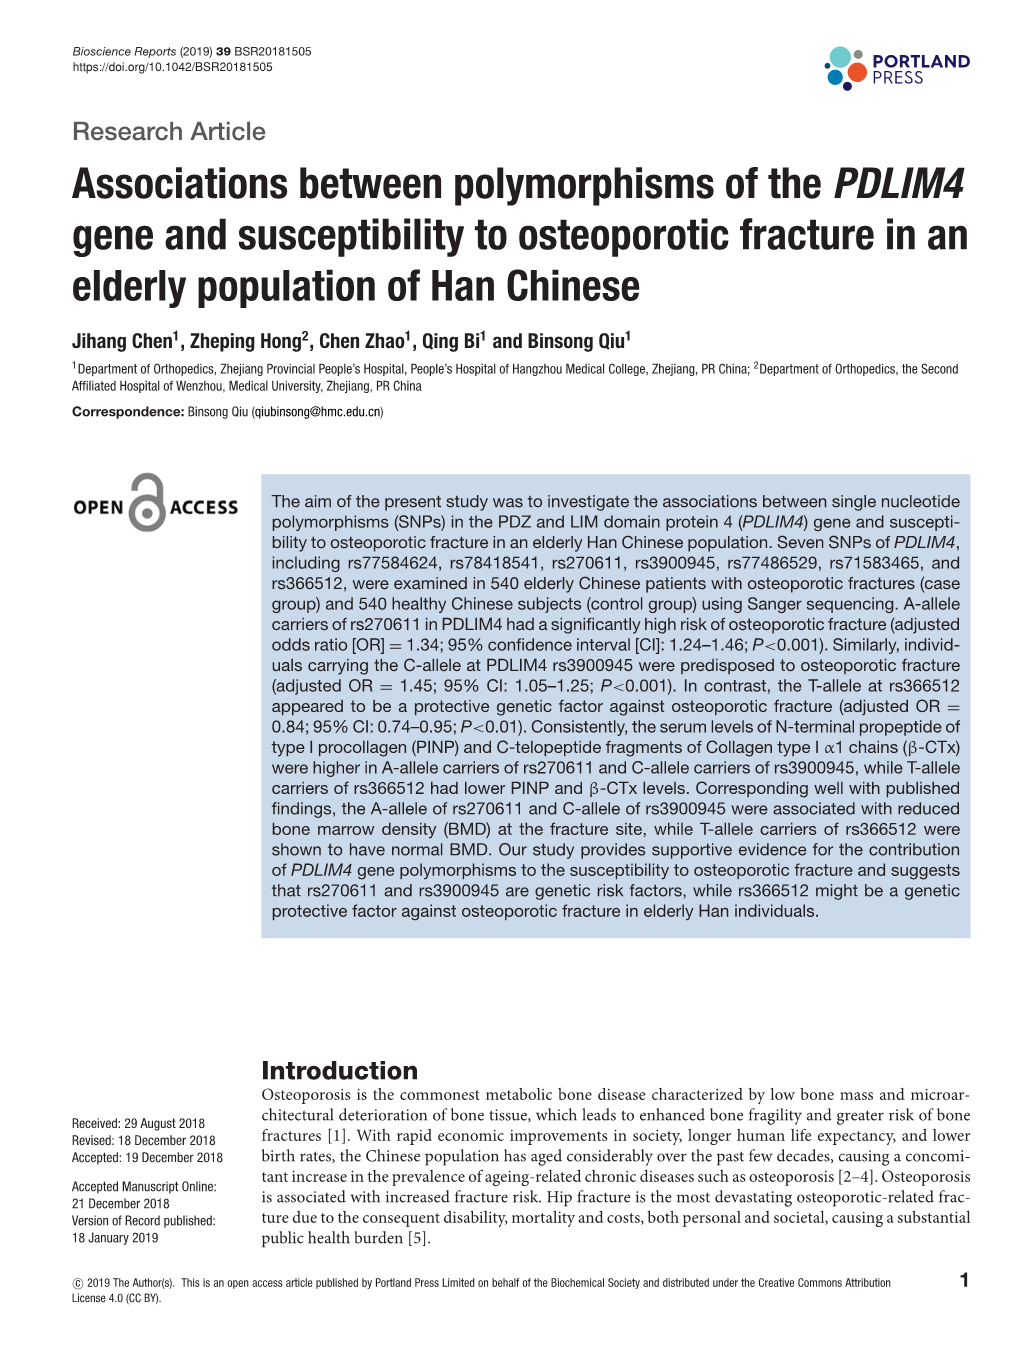 Associations Between Polymorphisms of the PDLIM4 Gene and Susceptibility to Osteoporotic Fracture in an Elderly Population of Han Chinese